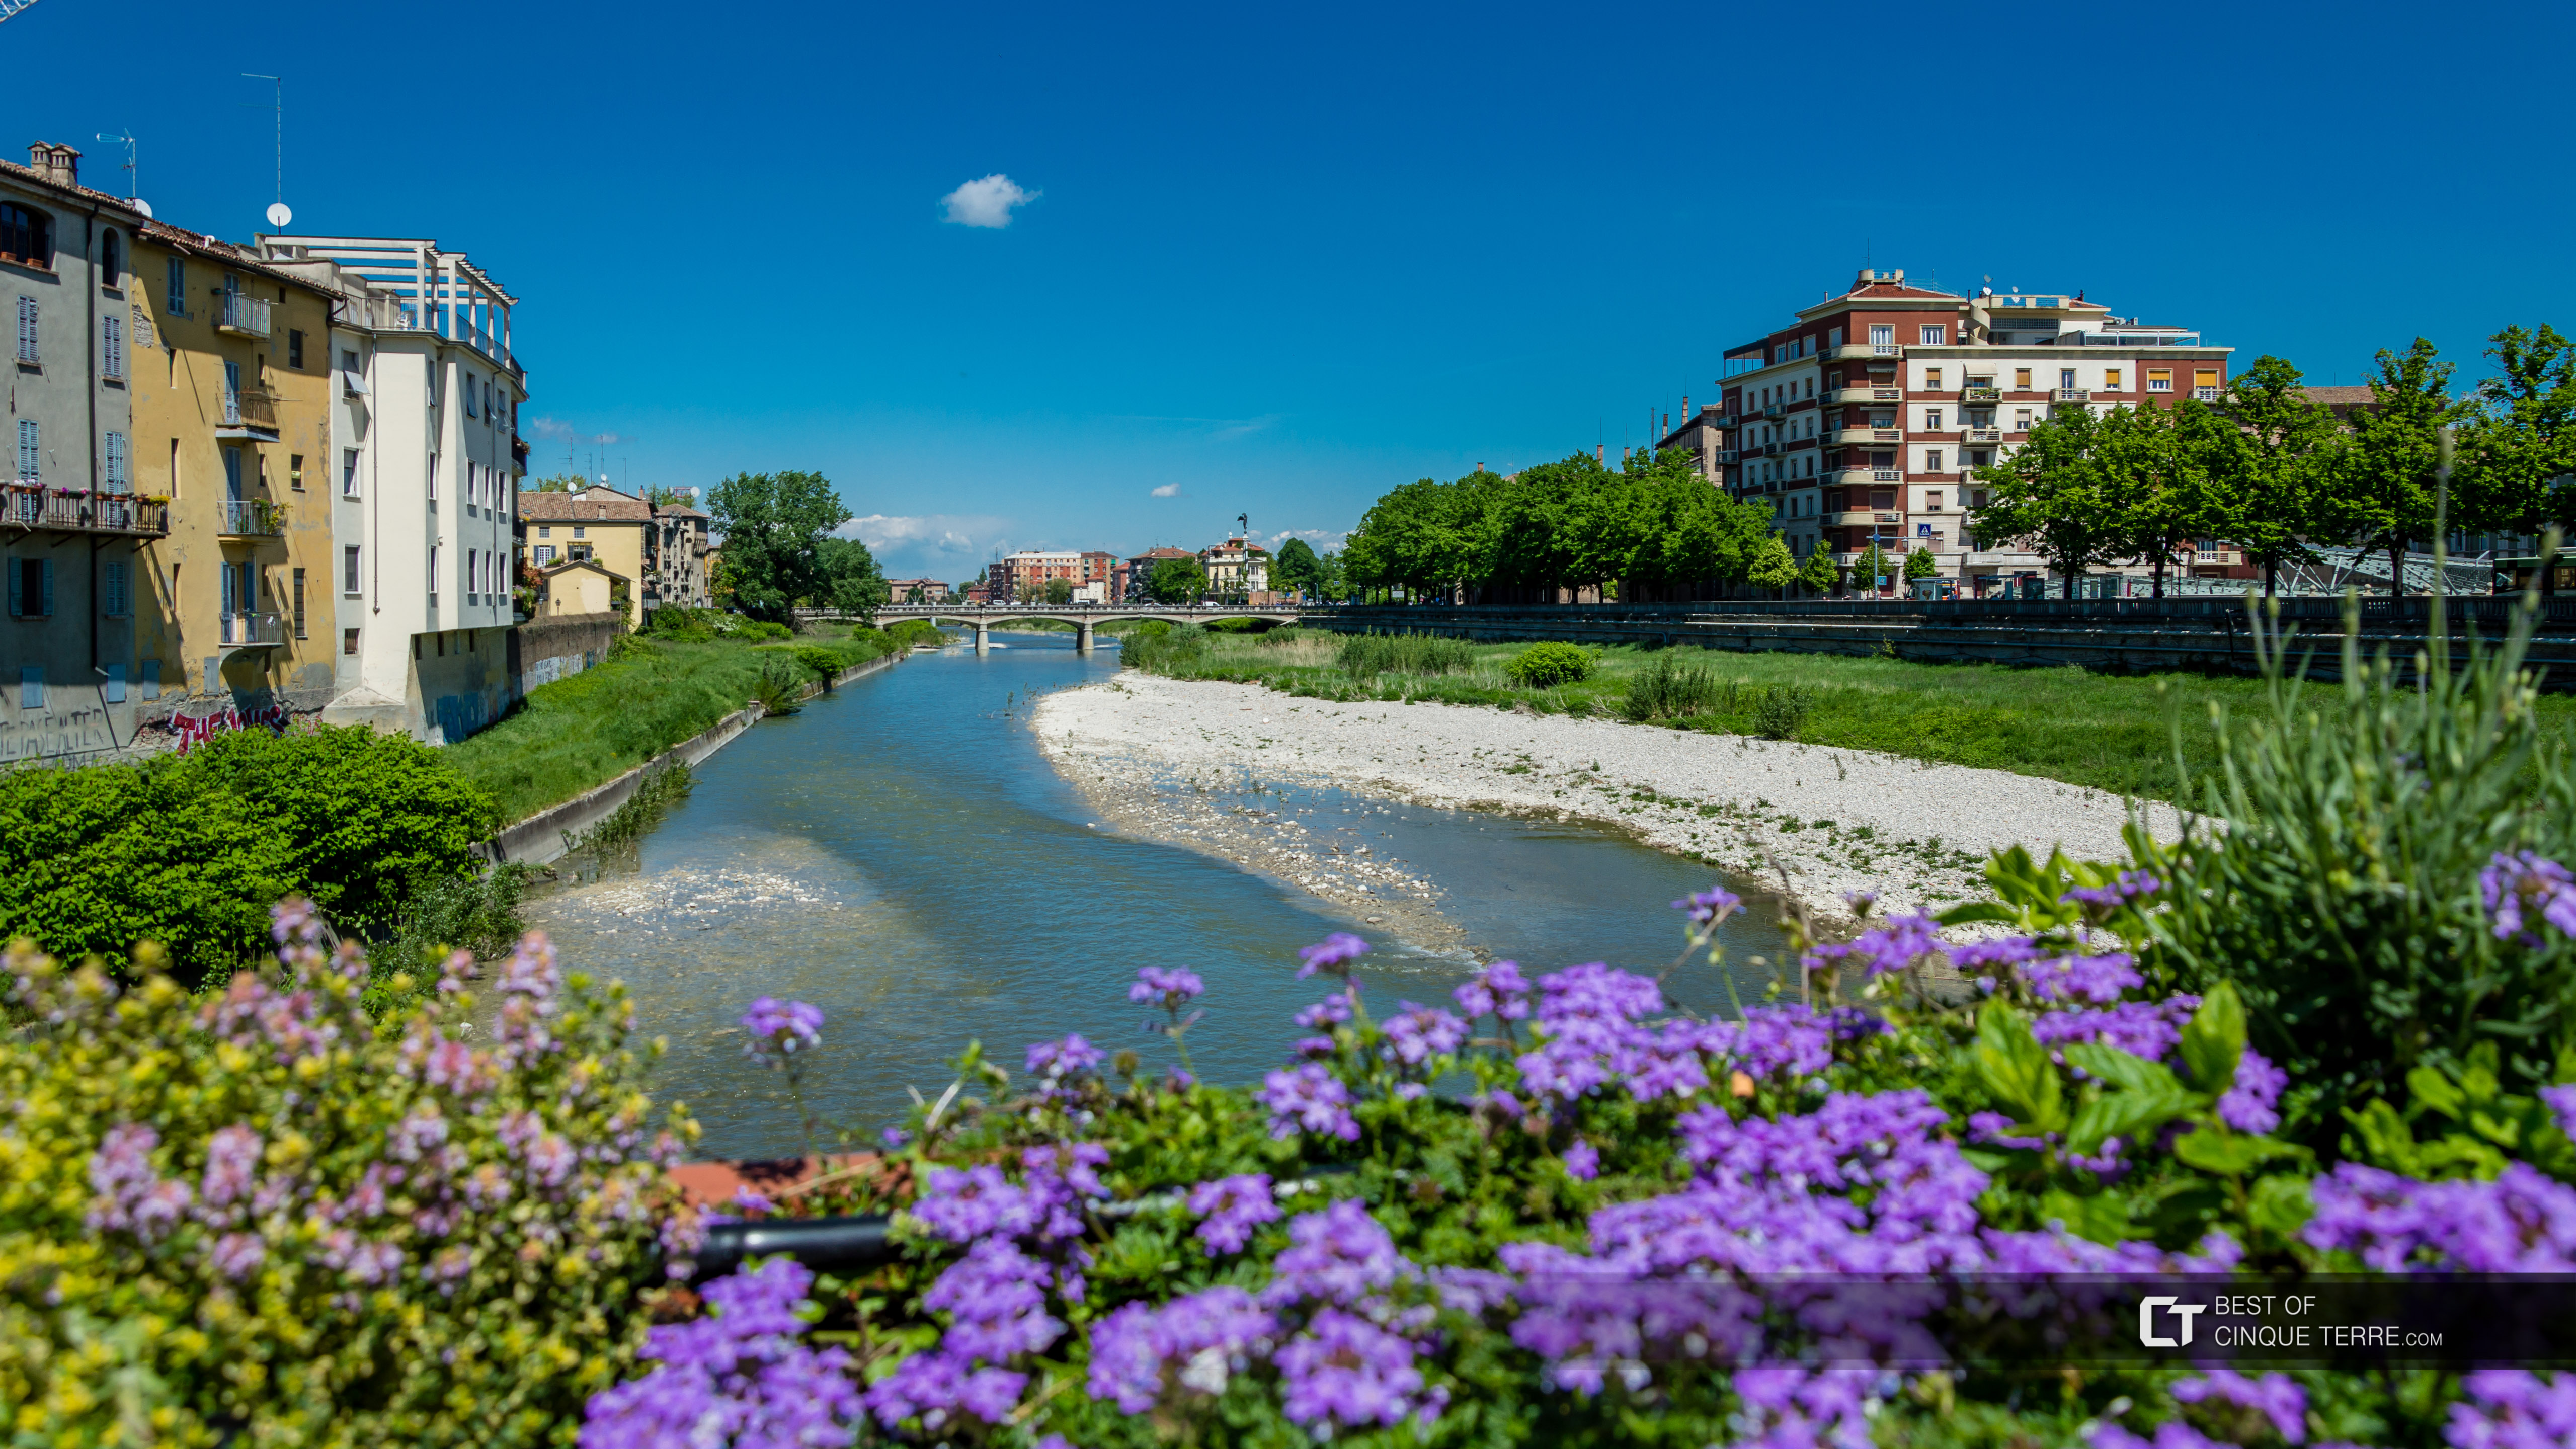 View of the River Parma from the Ponte di Mezzo, Italy